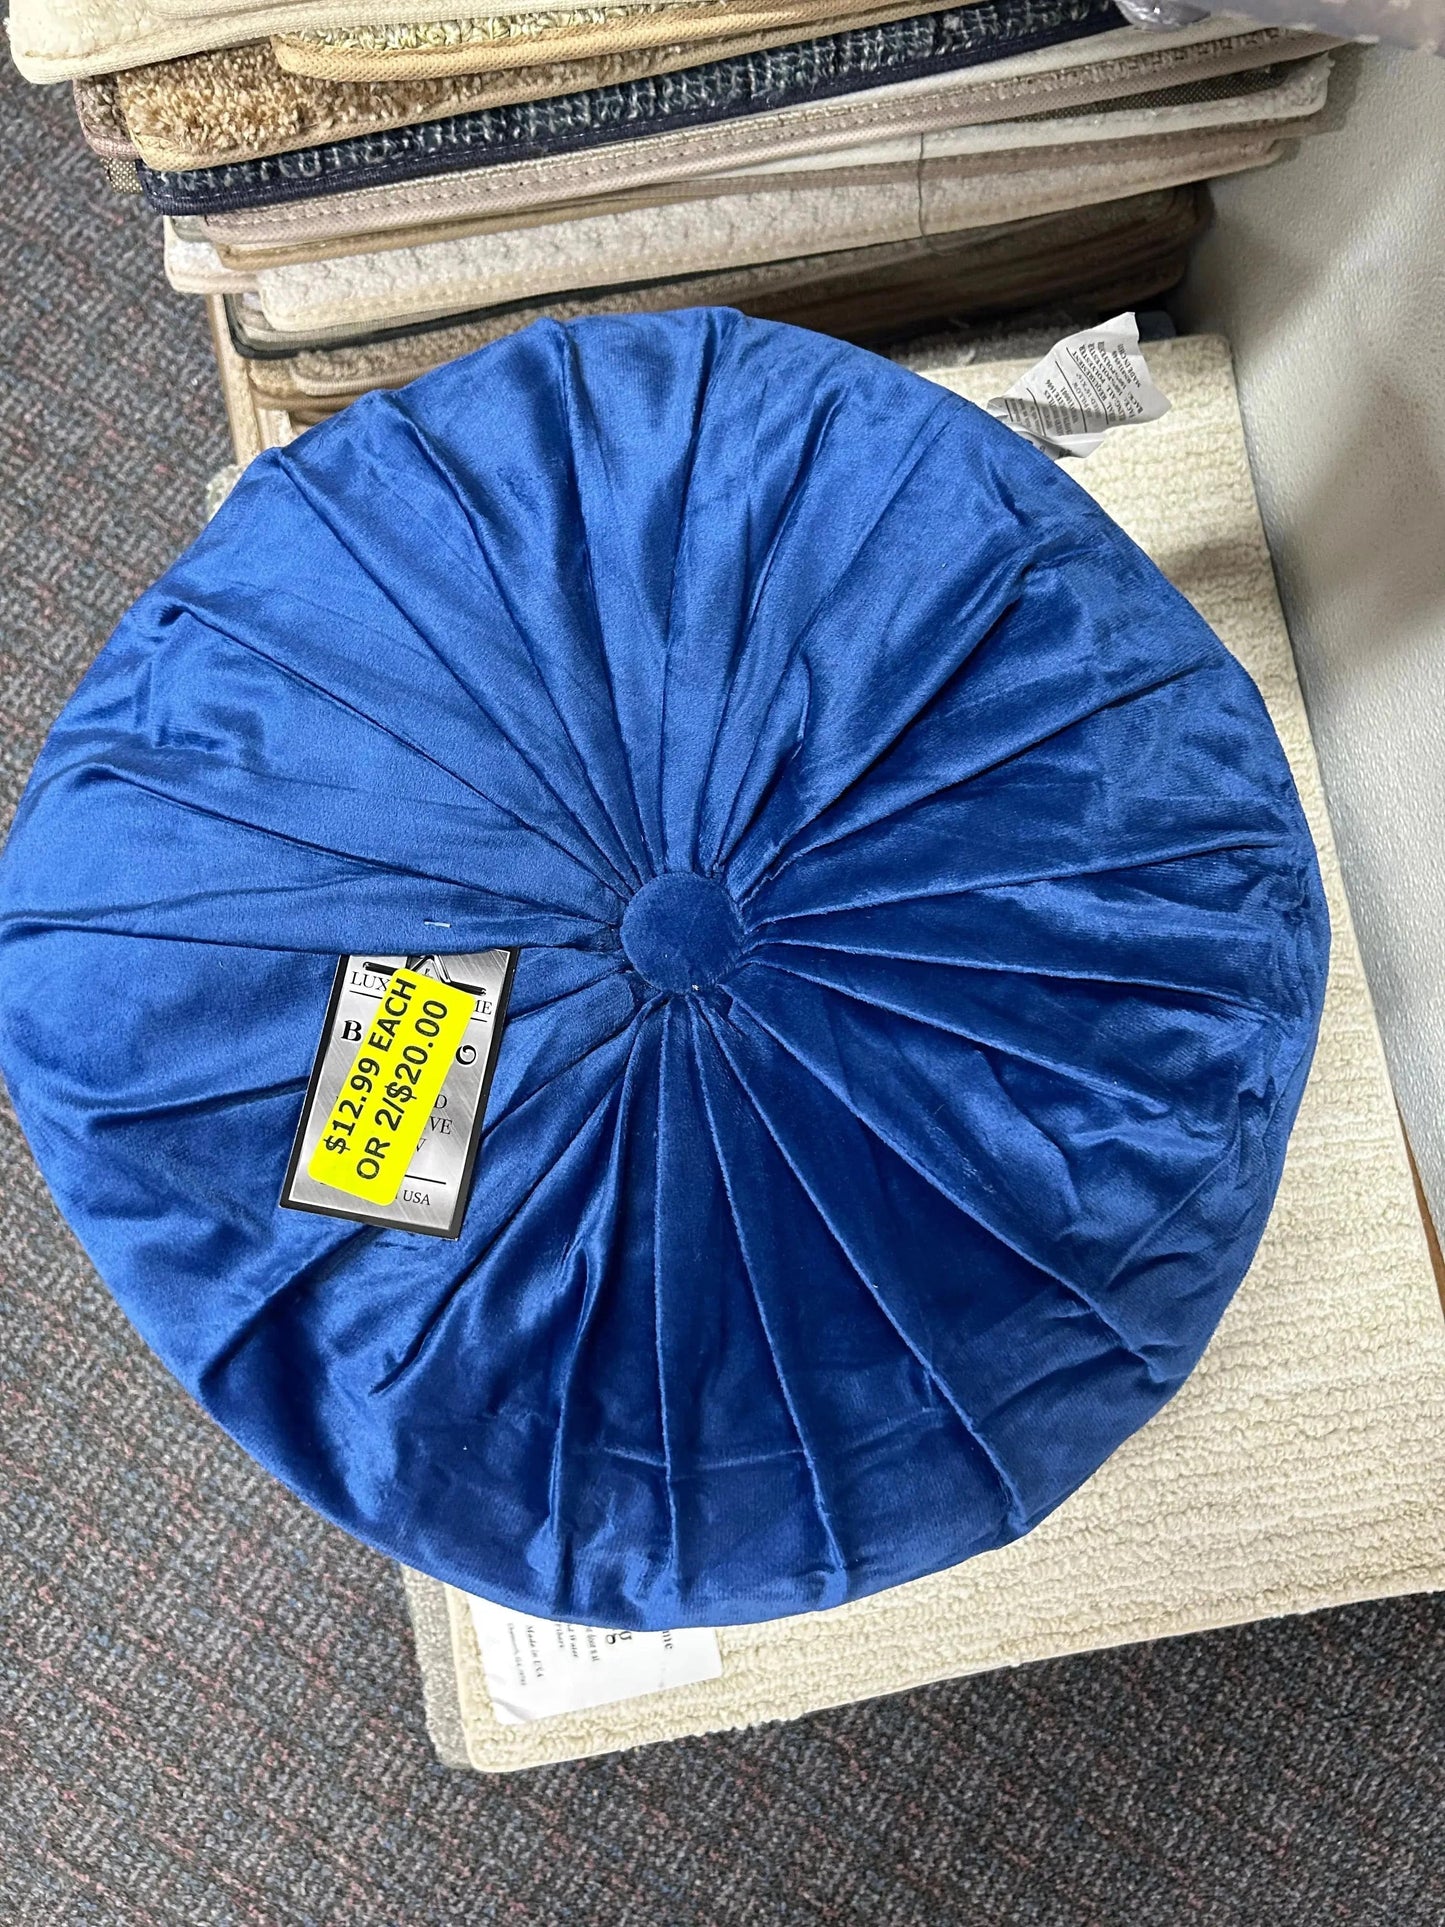 Linen World Royal Blue / Solid 16” Round Throw Pillow